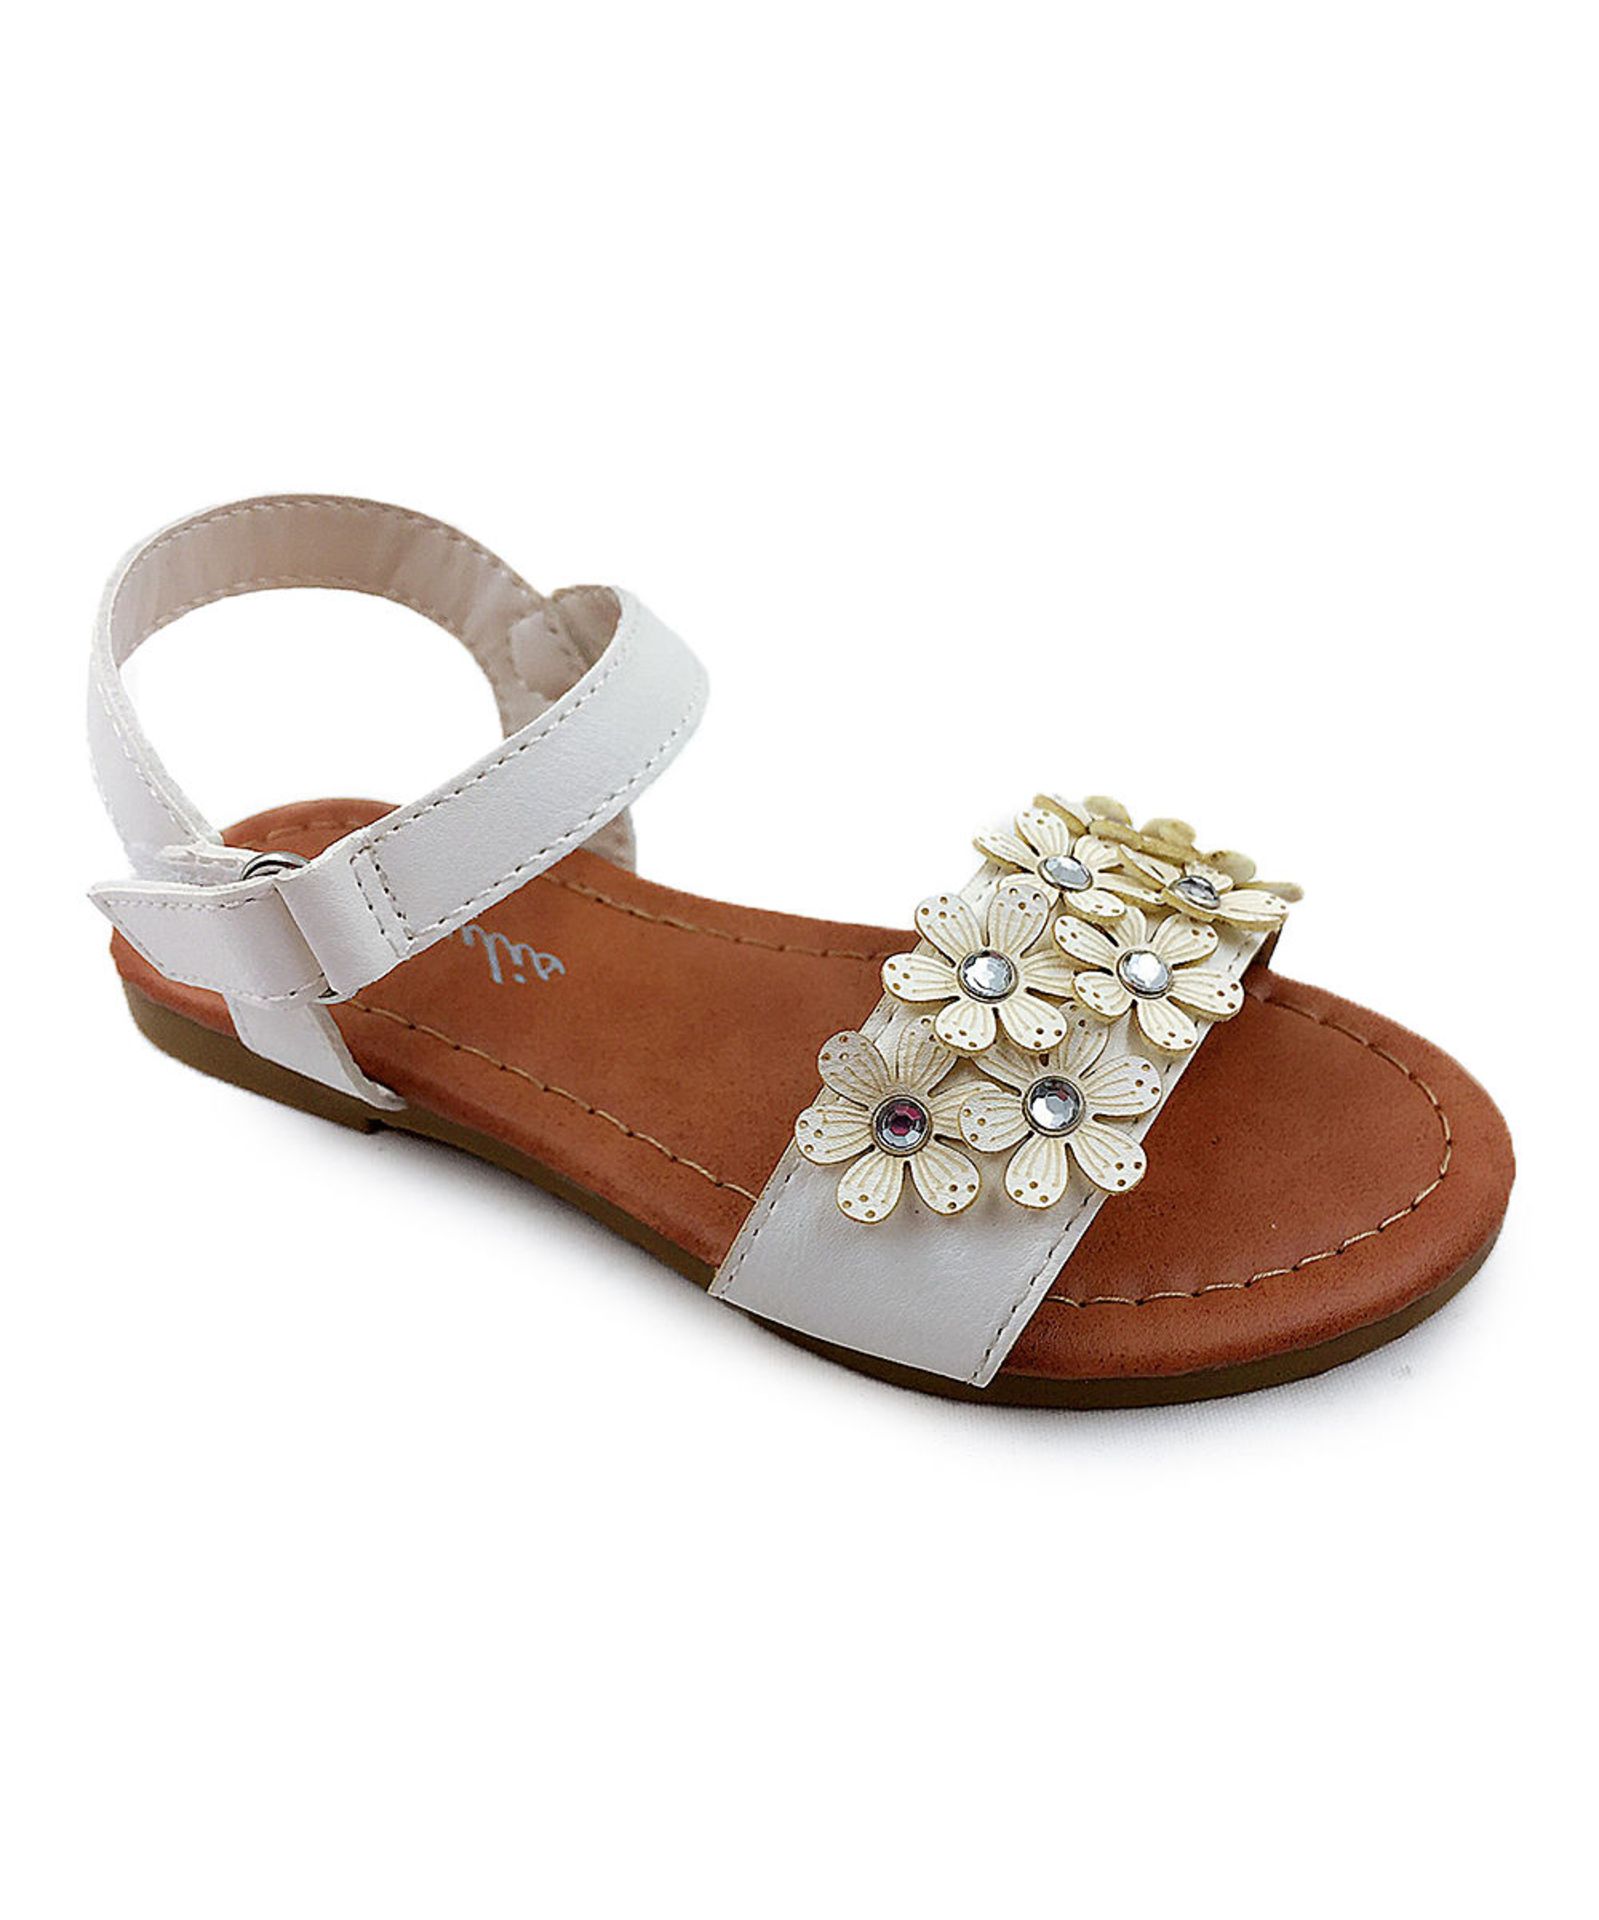 Chulis Footwear White Mia Ankle-Strap Sandal (Uk Size 7:Us Size 8) (New with box) [Ref: 45111514]